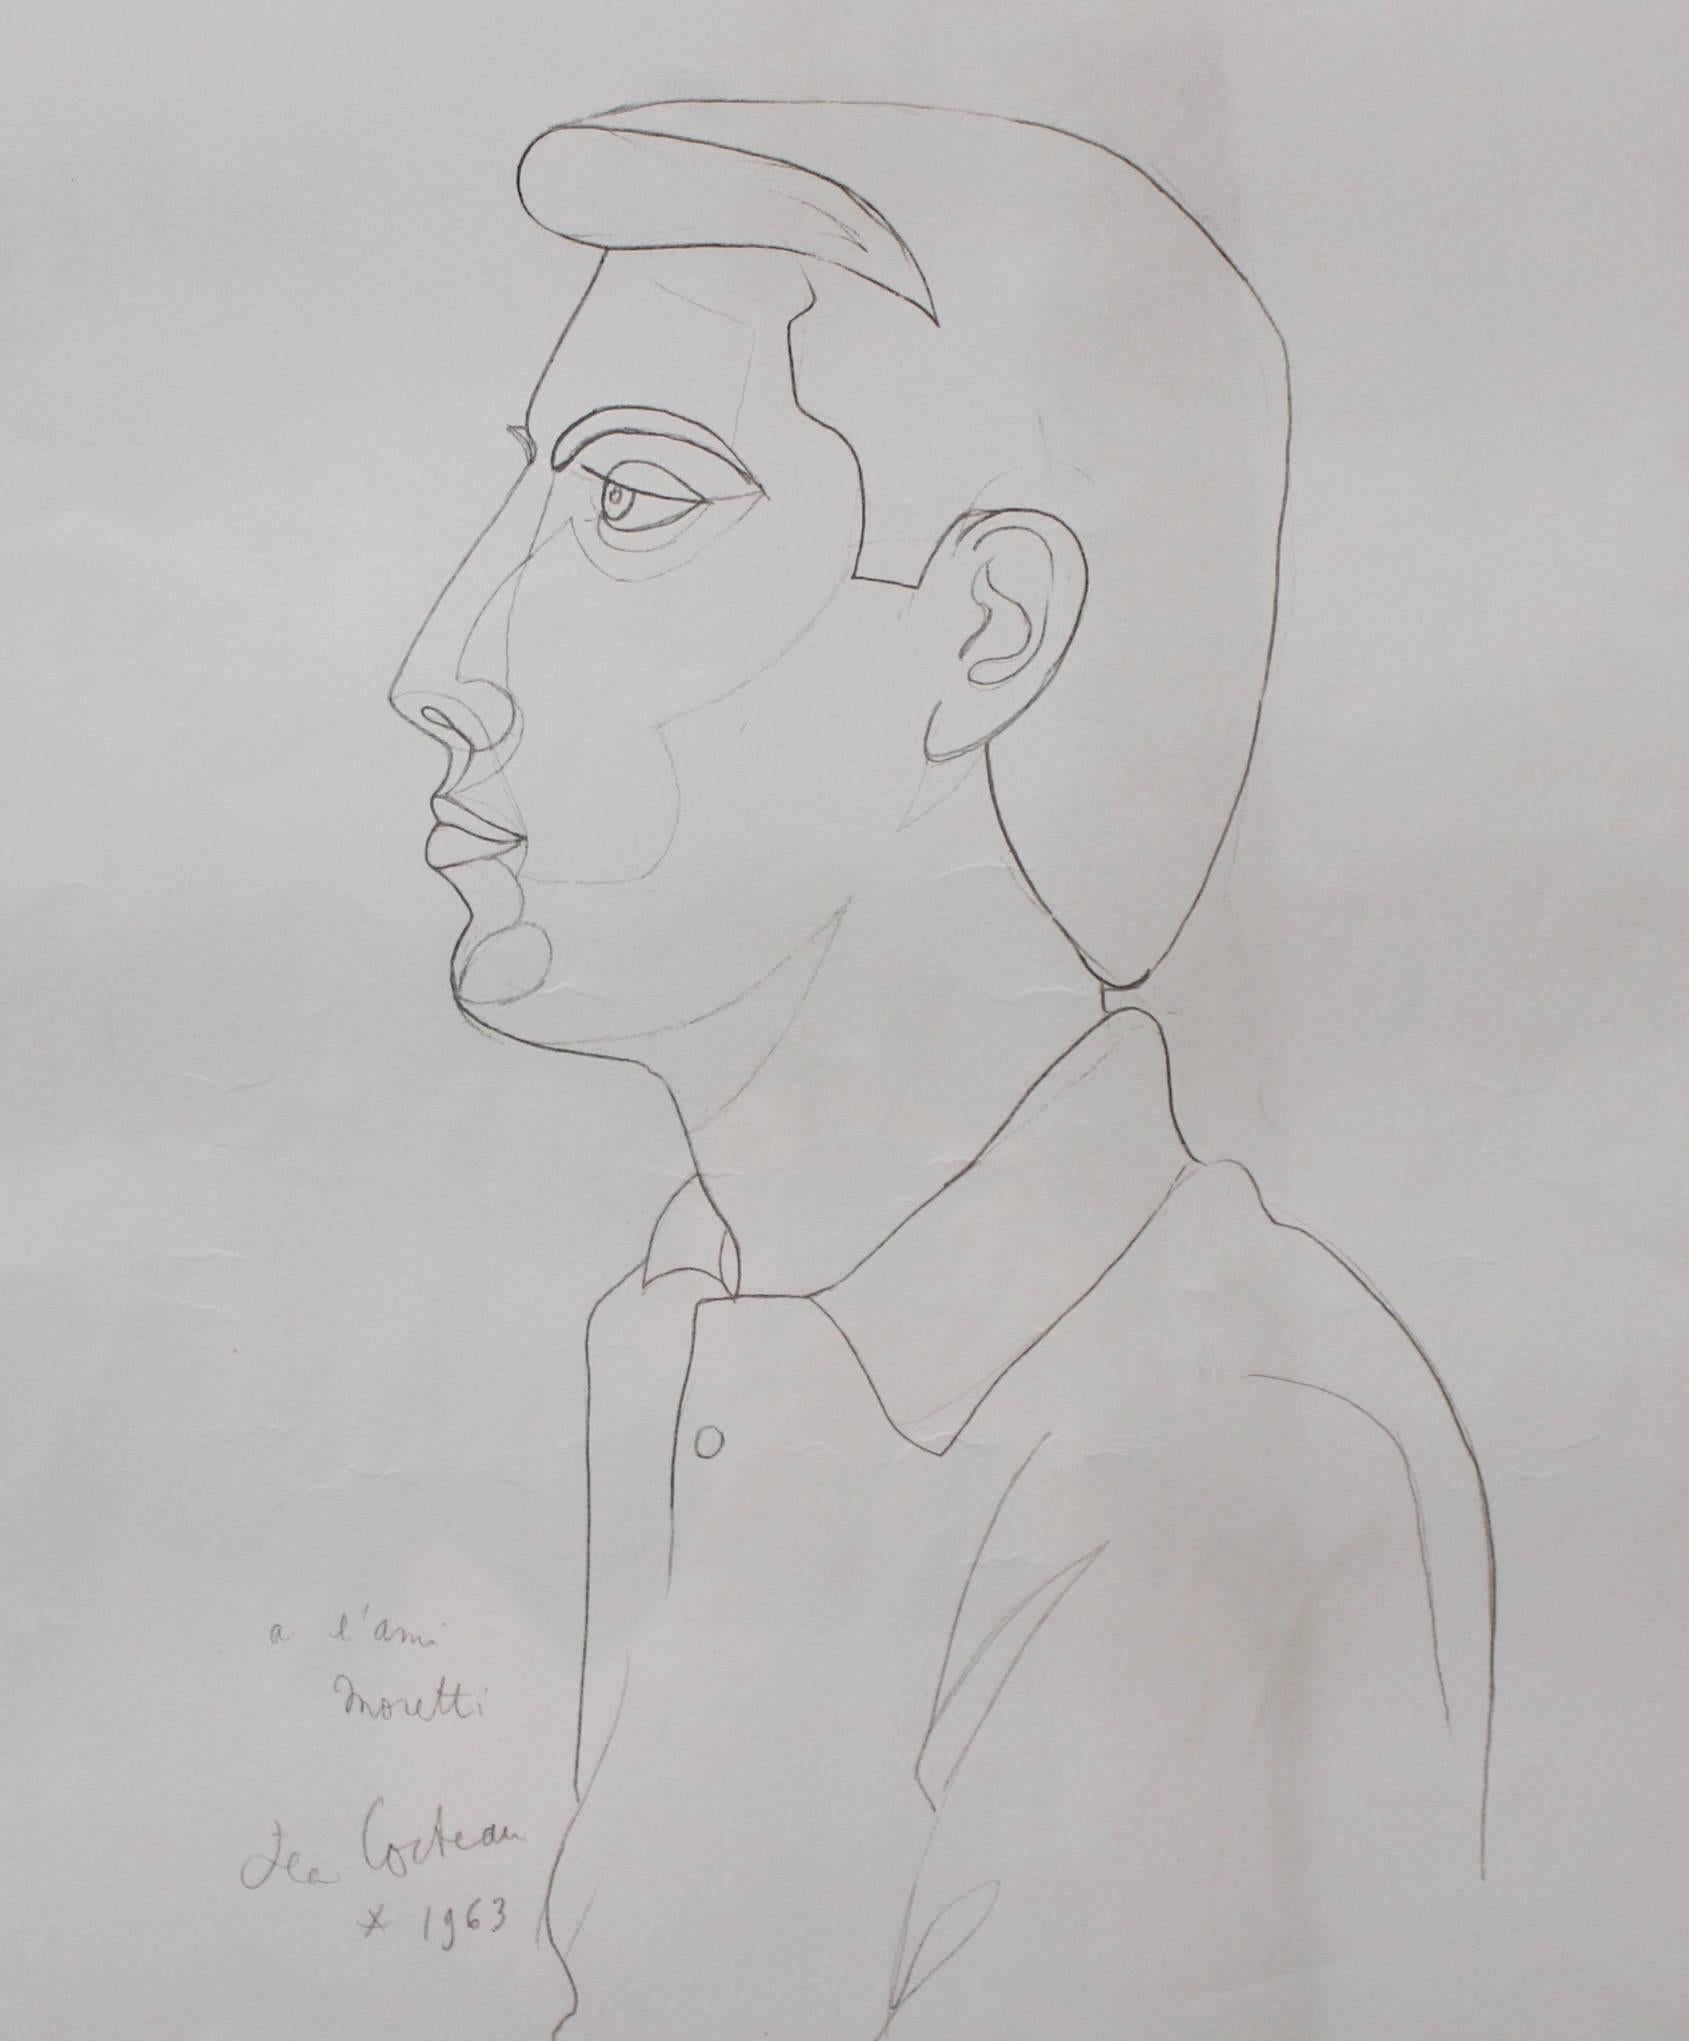 Original lithograph of a drawing of French artist and sculptor, Raymond Moretti (1931 - 2005) by Jean Cocteau (1889 - 1963). Cocteau and Moretti collaborated on several art works and this drawing by Cocteau is an homage to their friendship. This is